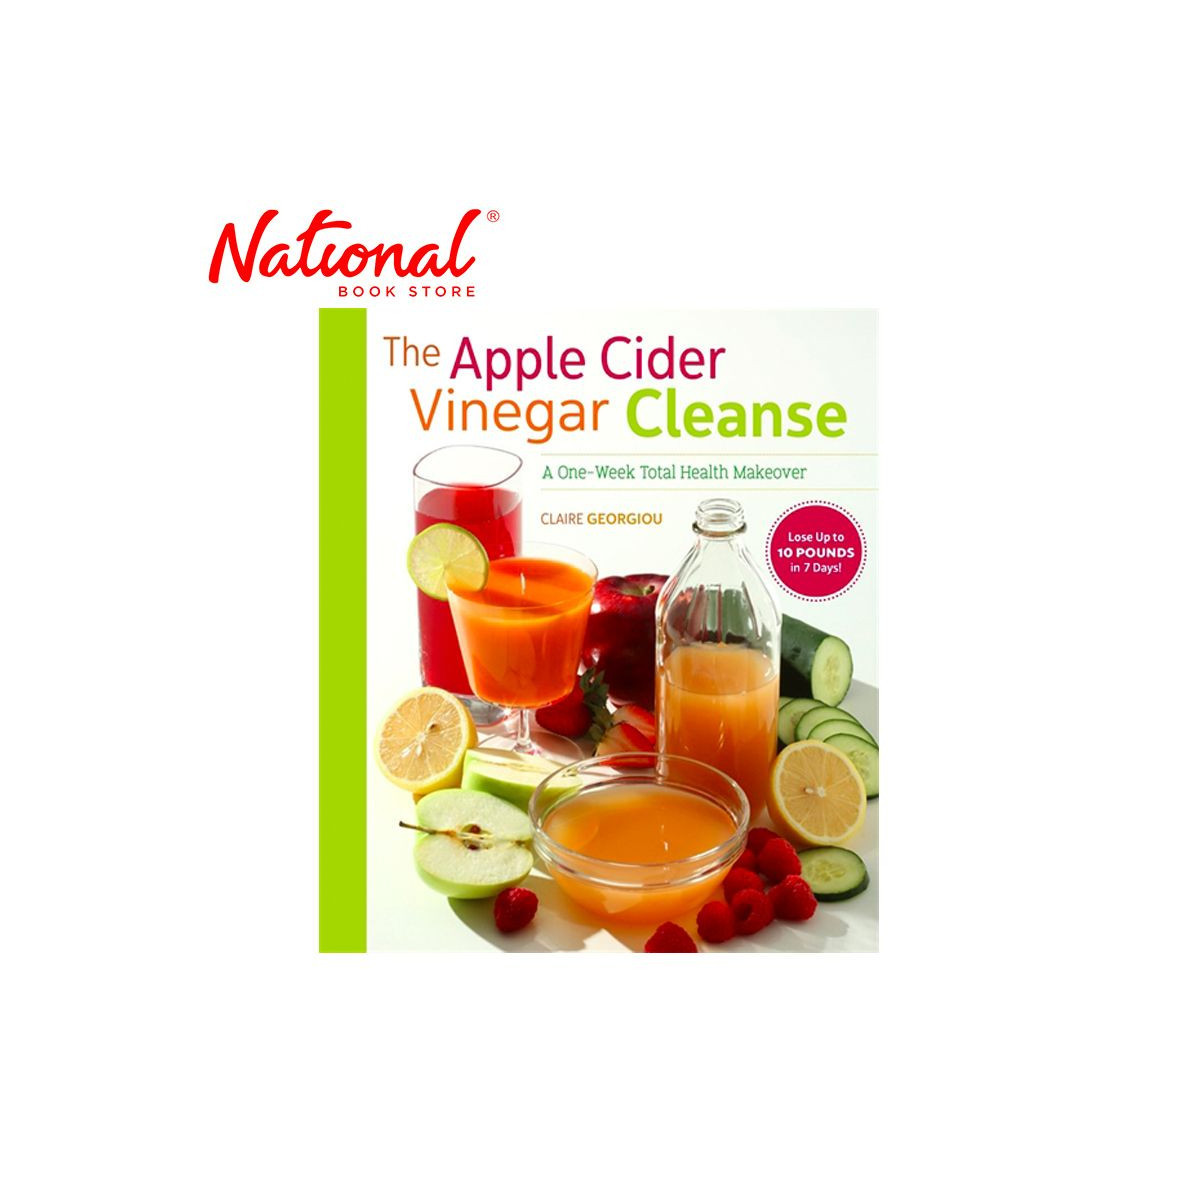 The Apple Cider Vinegar Cleanse Tradpaper by Claire GeOrganizeriou - Health & Nutrition